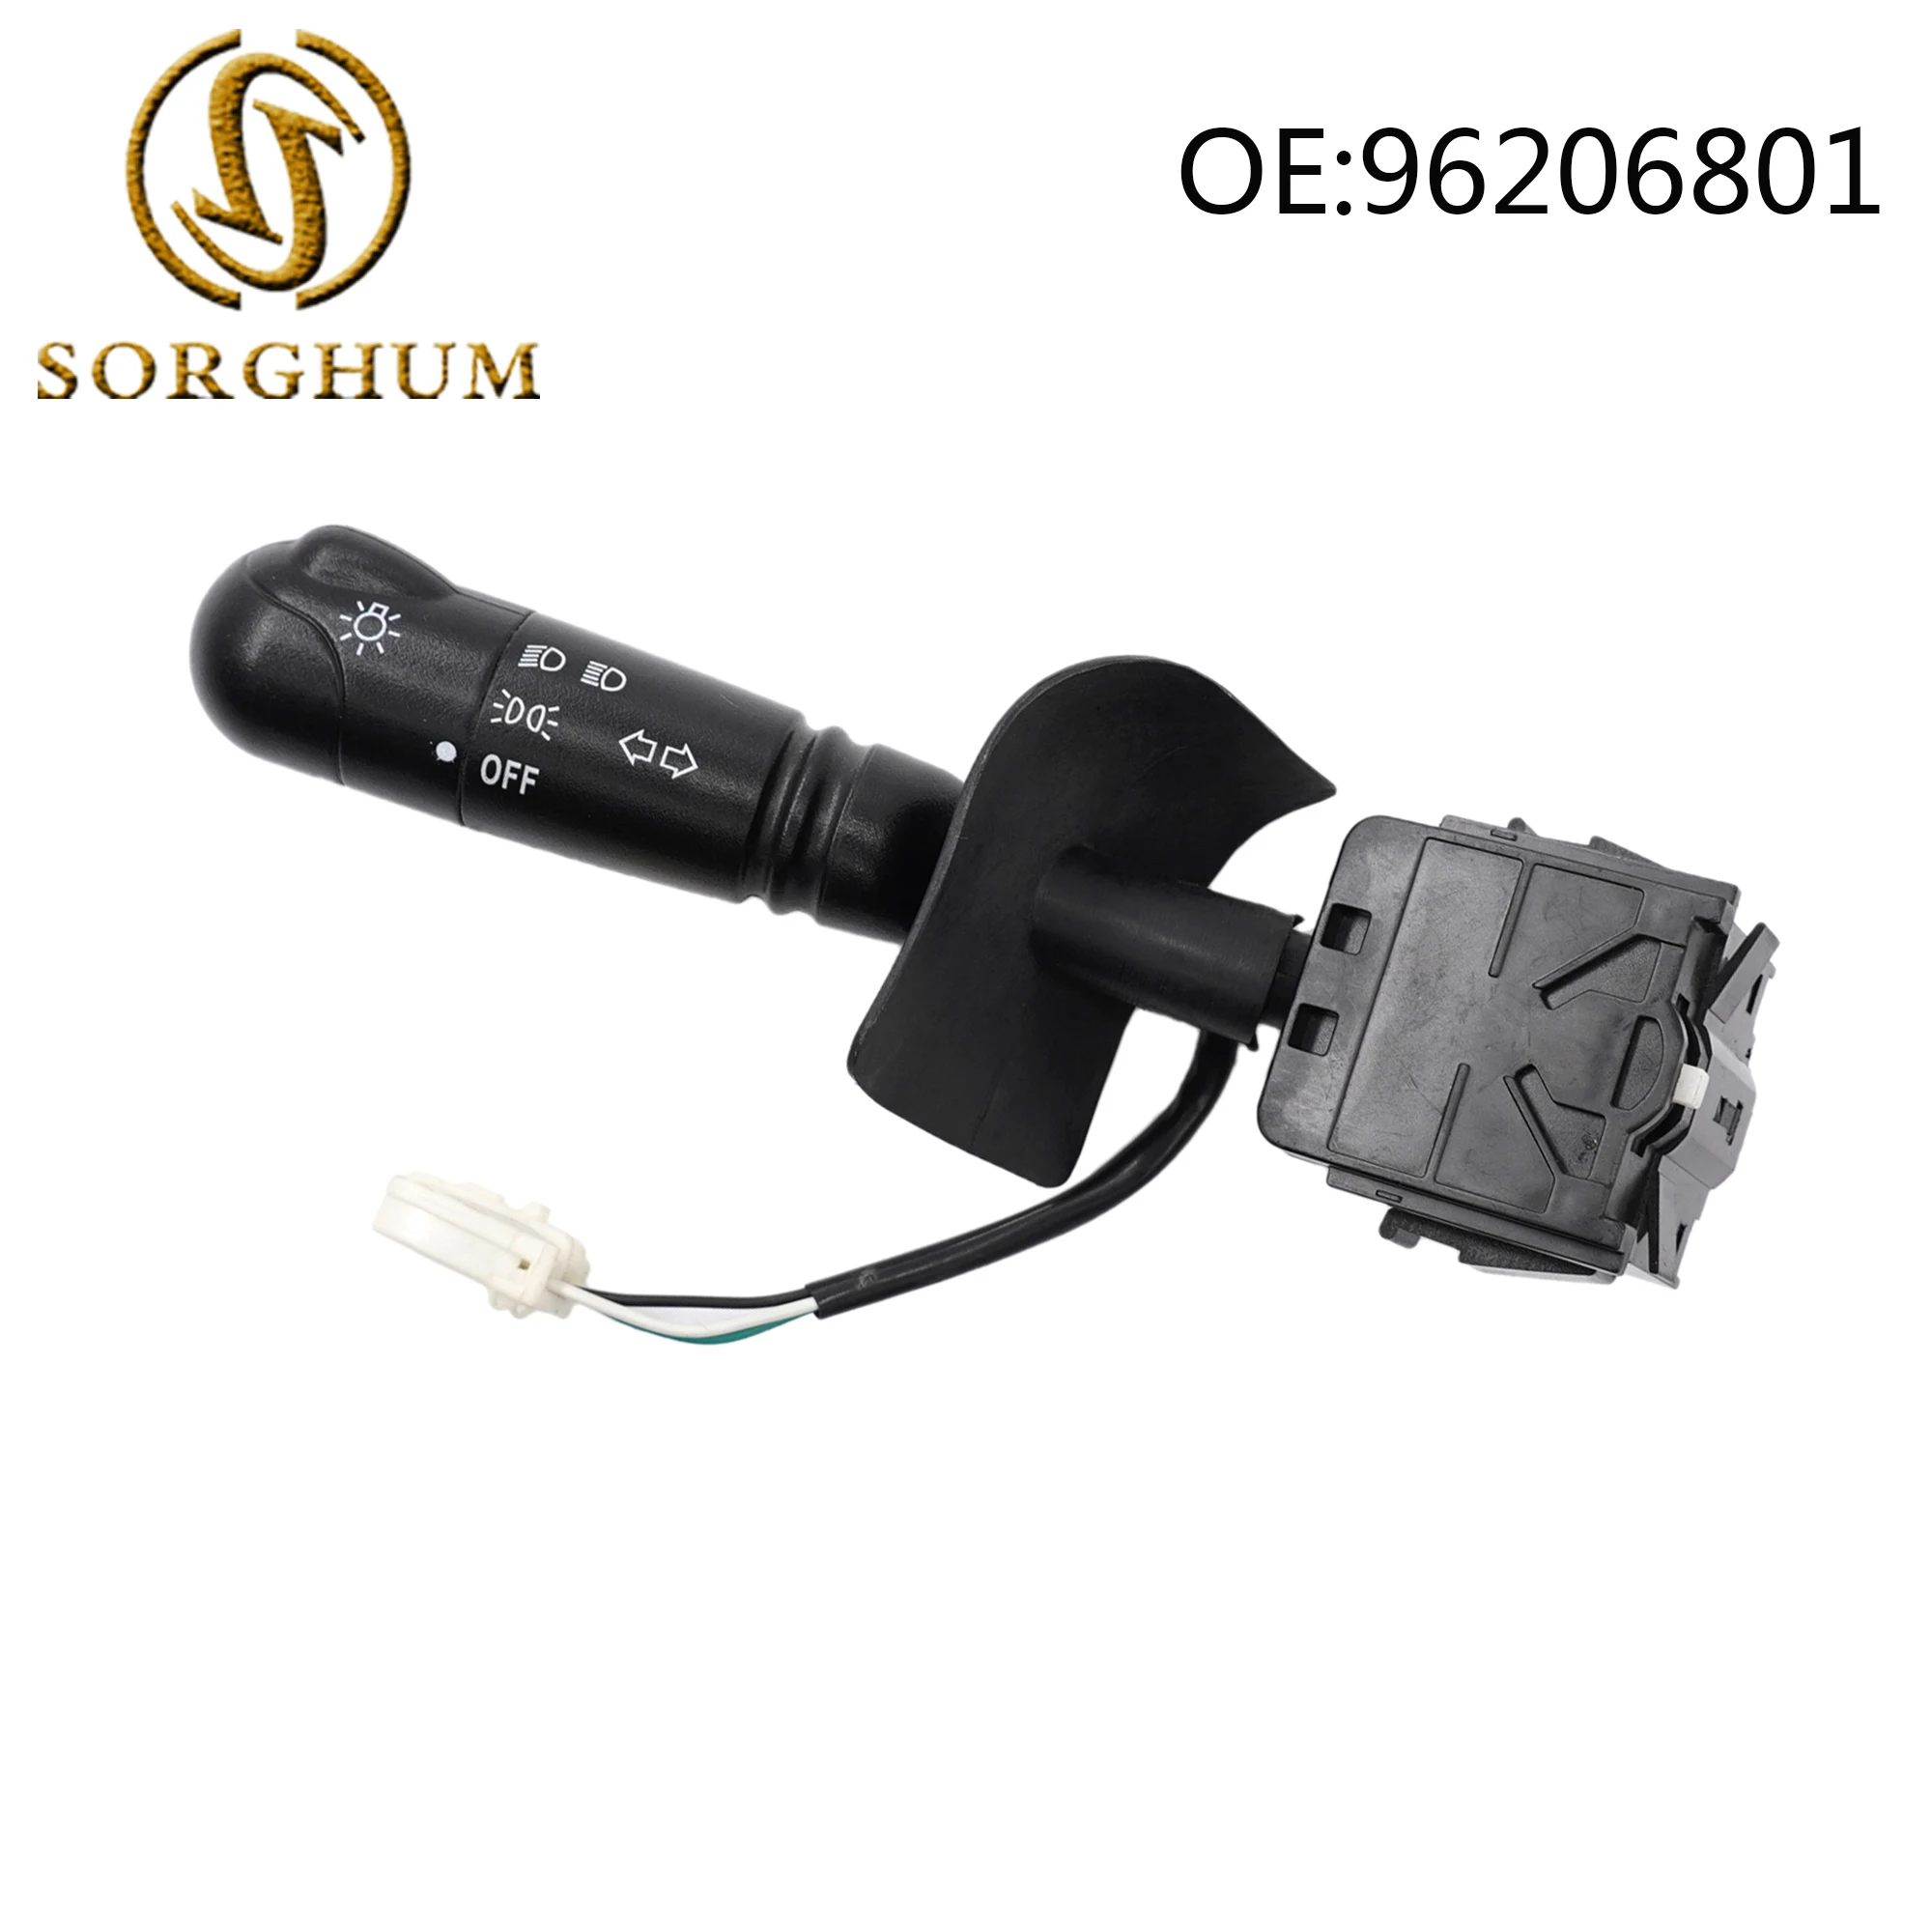 

Sorghum New Car Combination Switch Turn Signal Light Control Steering Indicator Switch 96206801 For GM DAEWOO Leganza 2000-2002